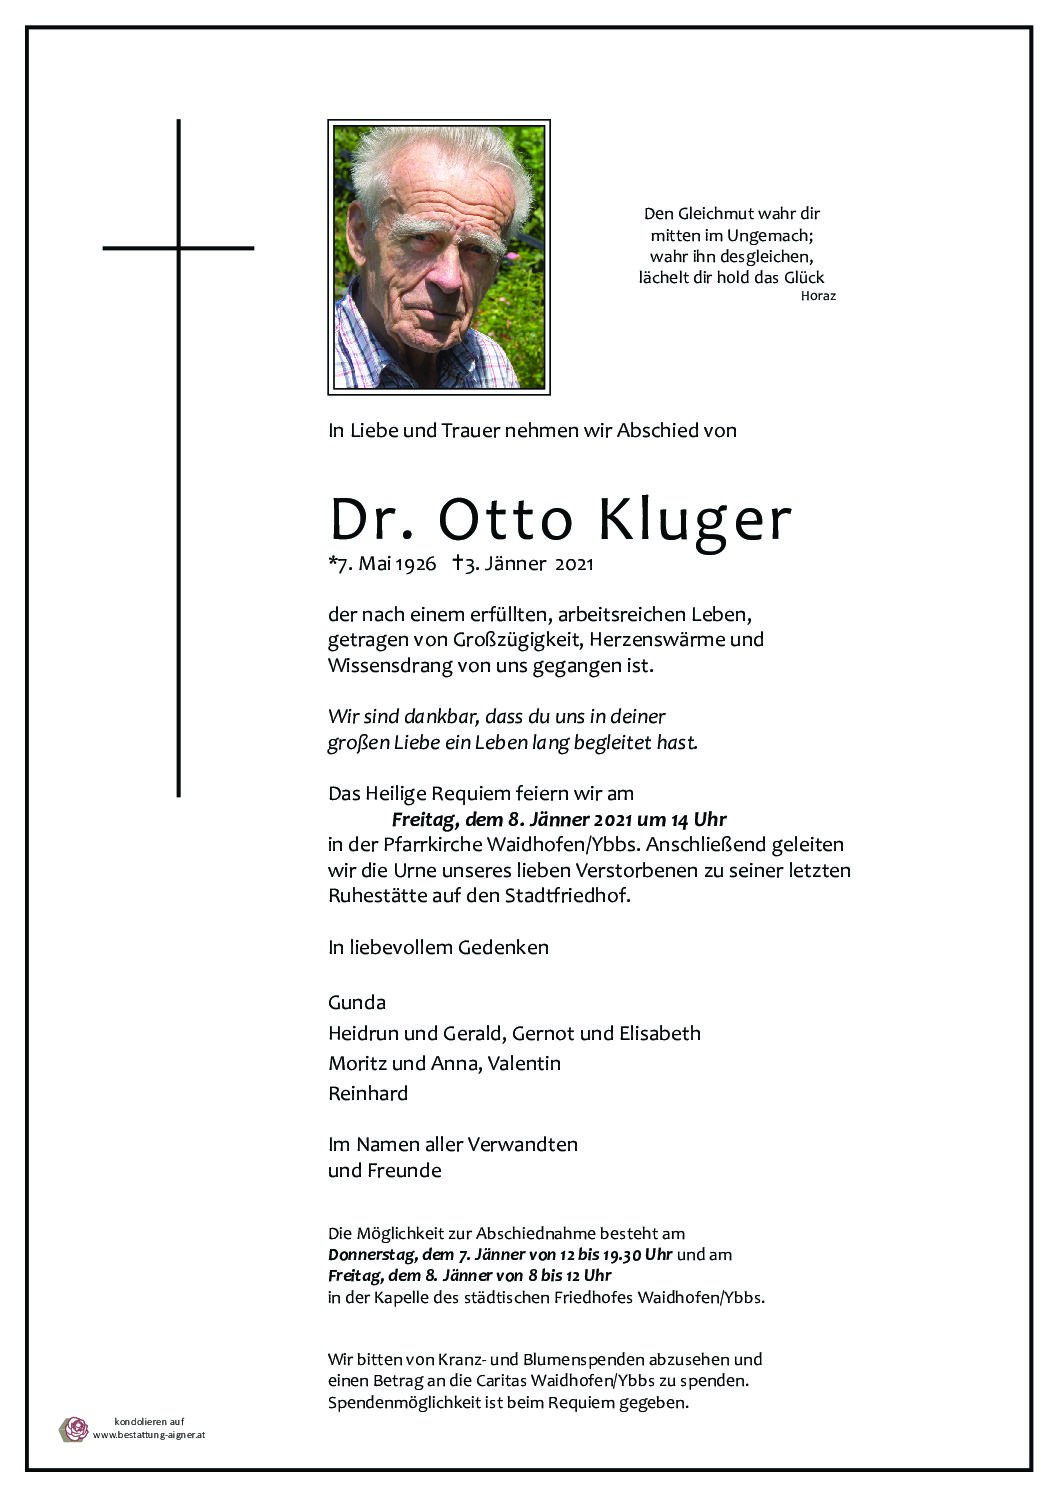 Dr. Otto Kluger